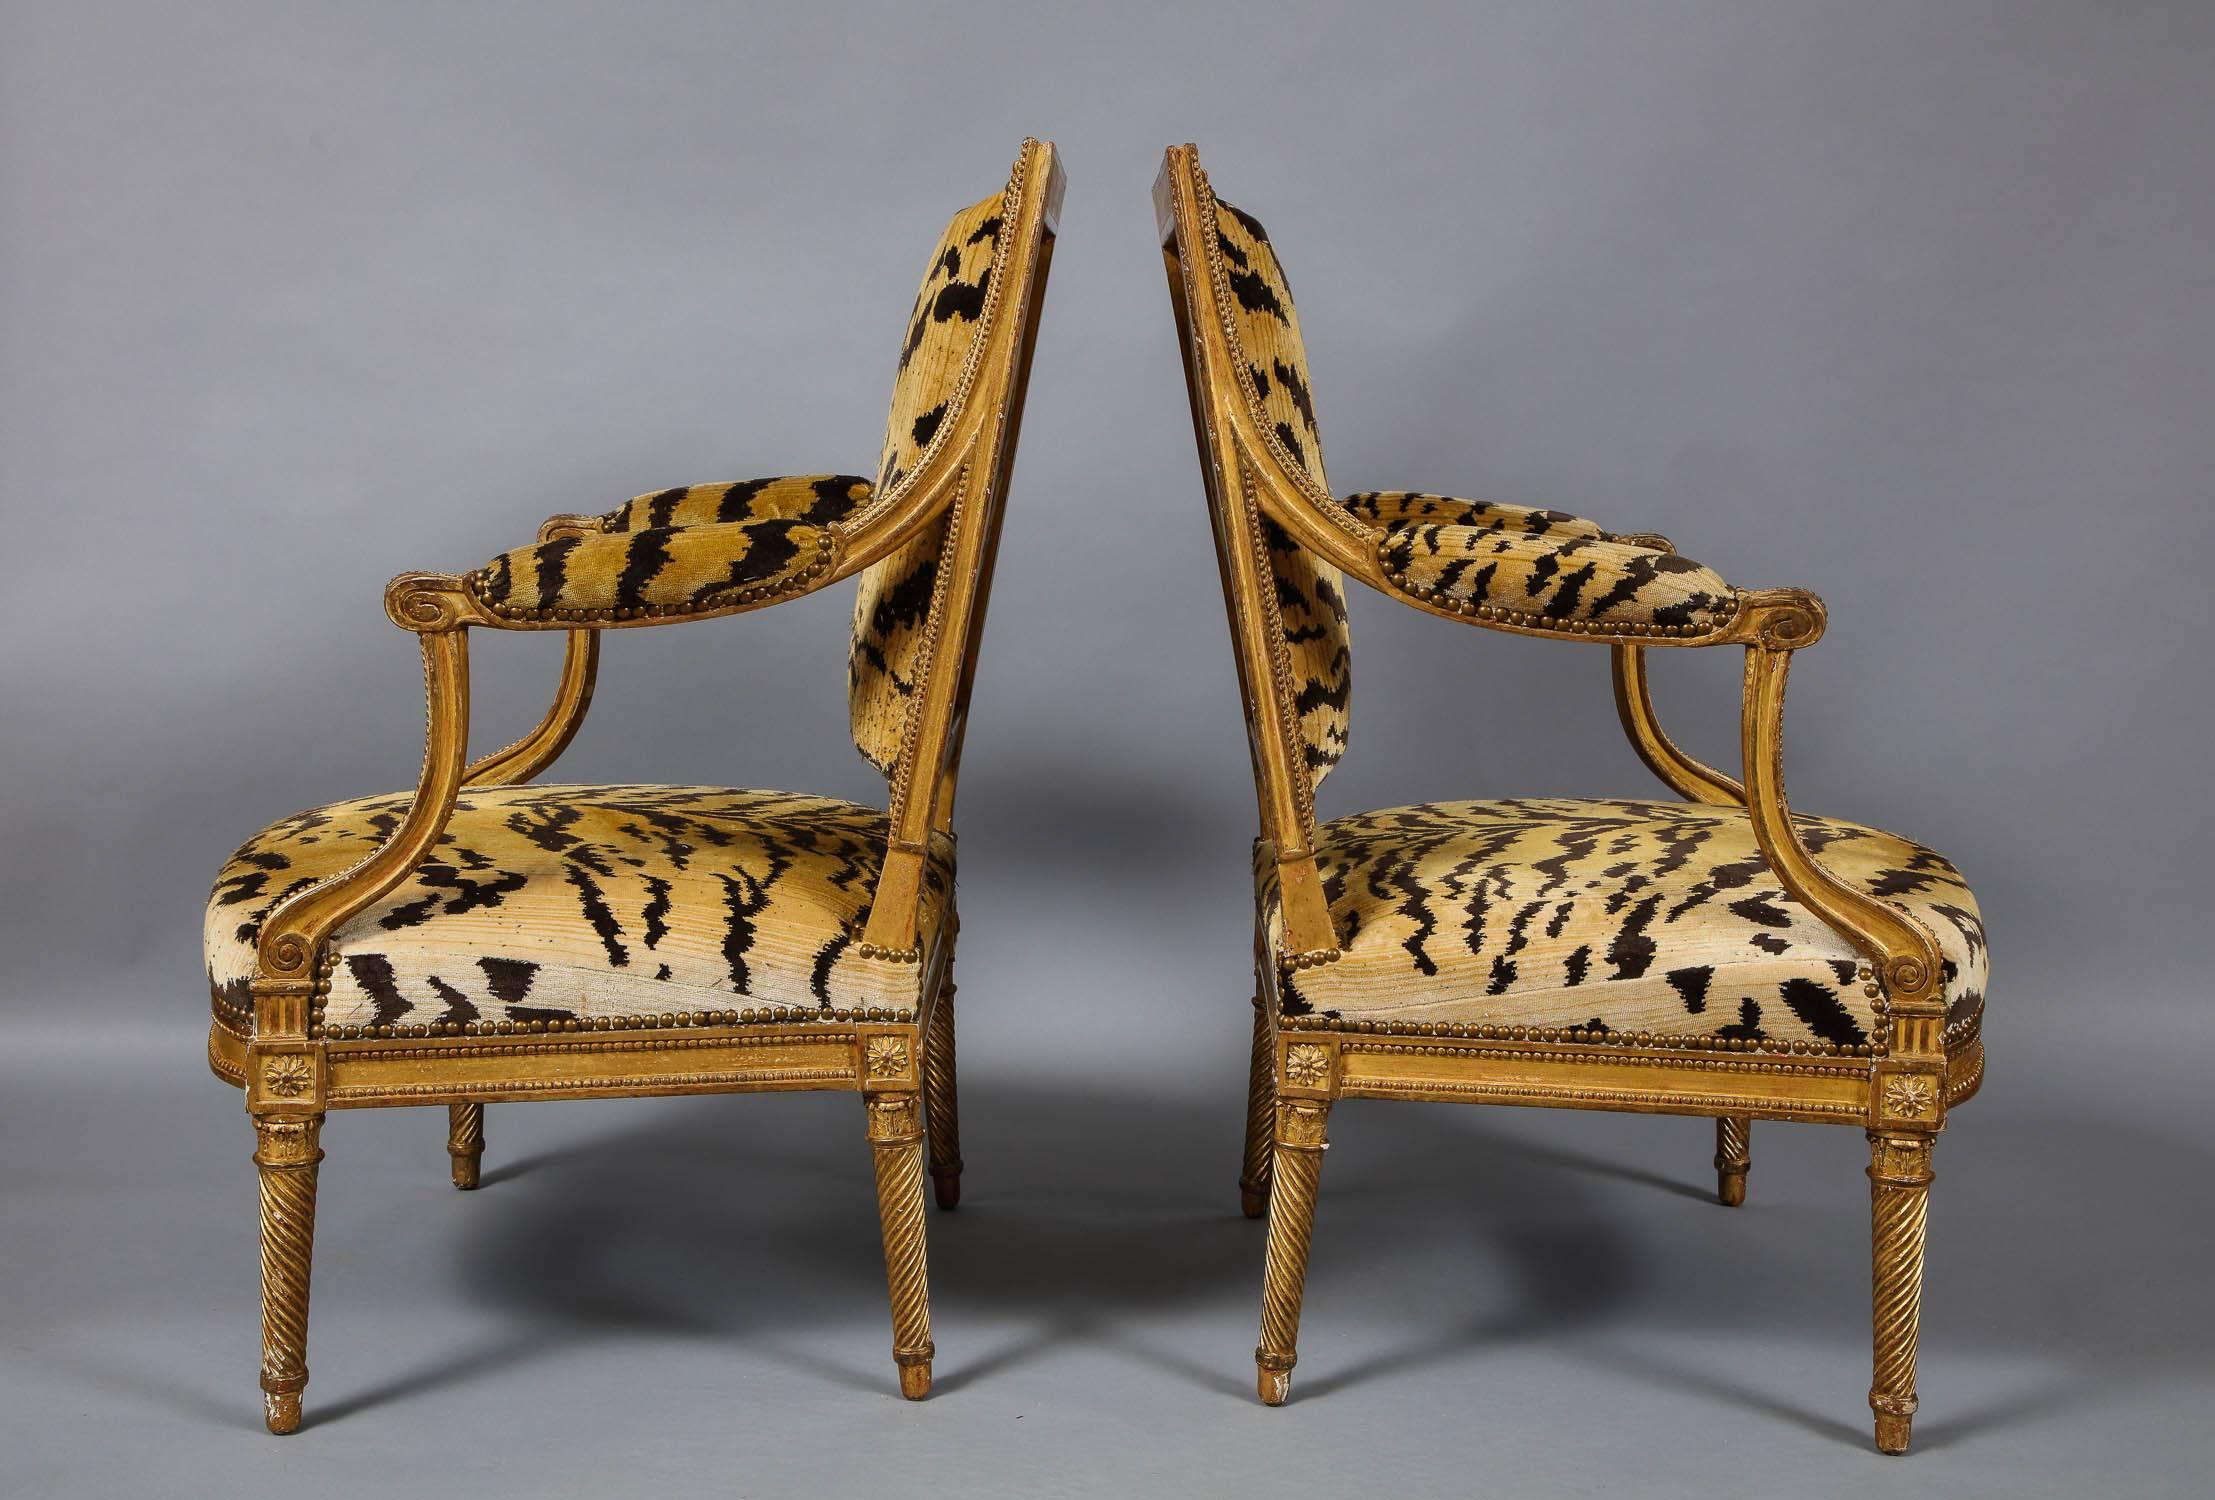 Important Pair of Louis XVI Giltwood Chairs by Jacob 4